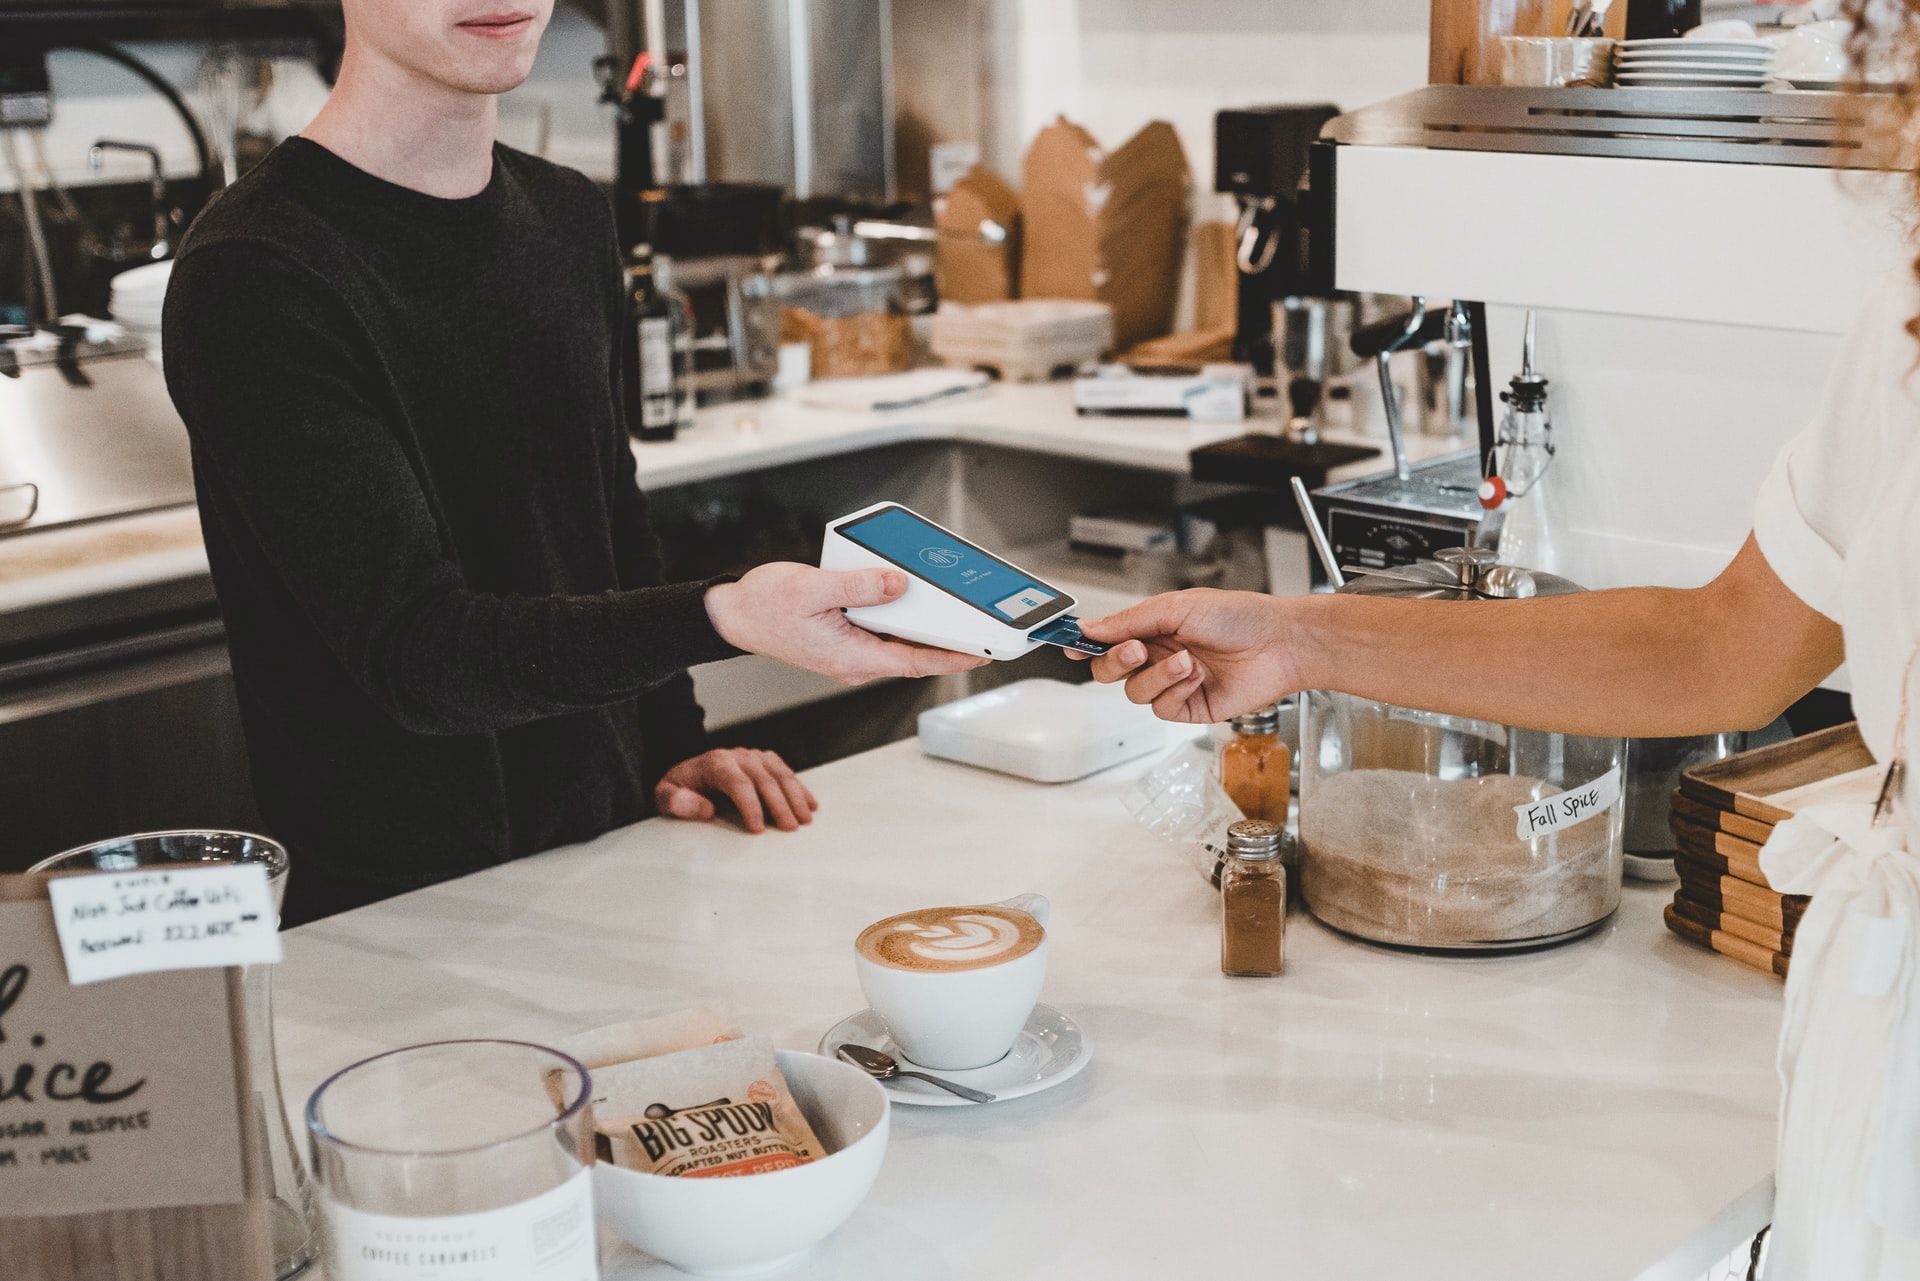 5 Best Credit Card Processing Companies For 2022 - Features and Advantages